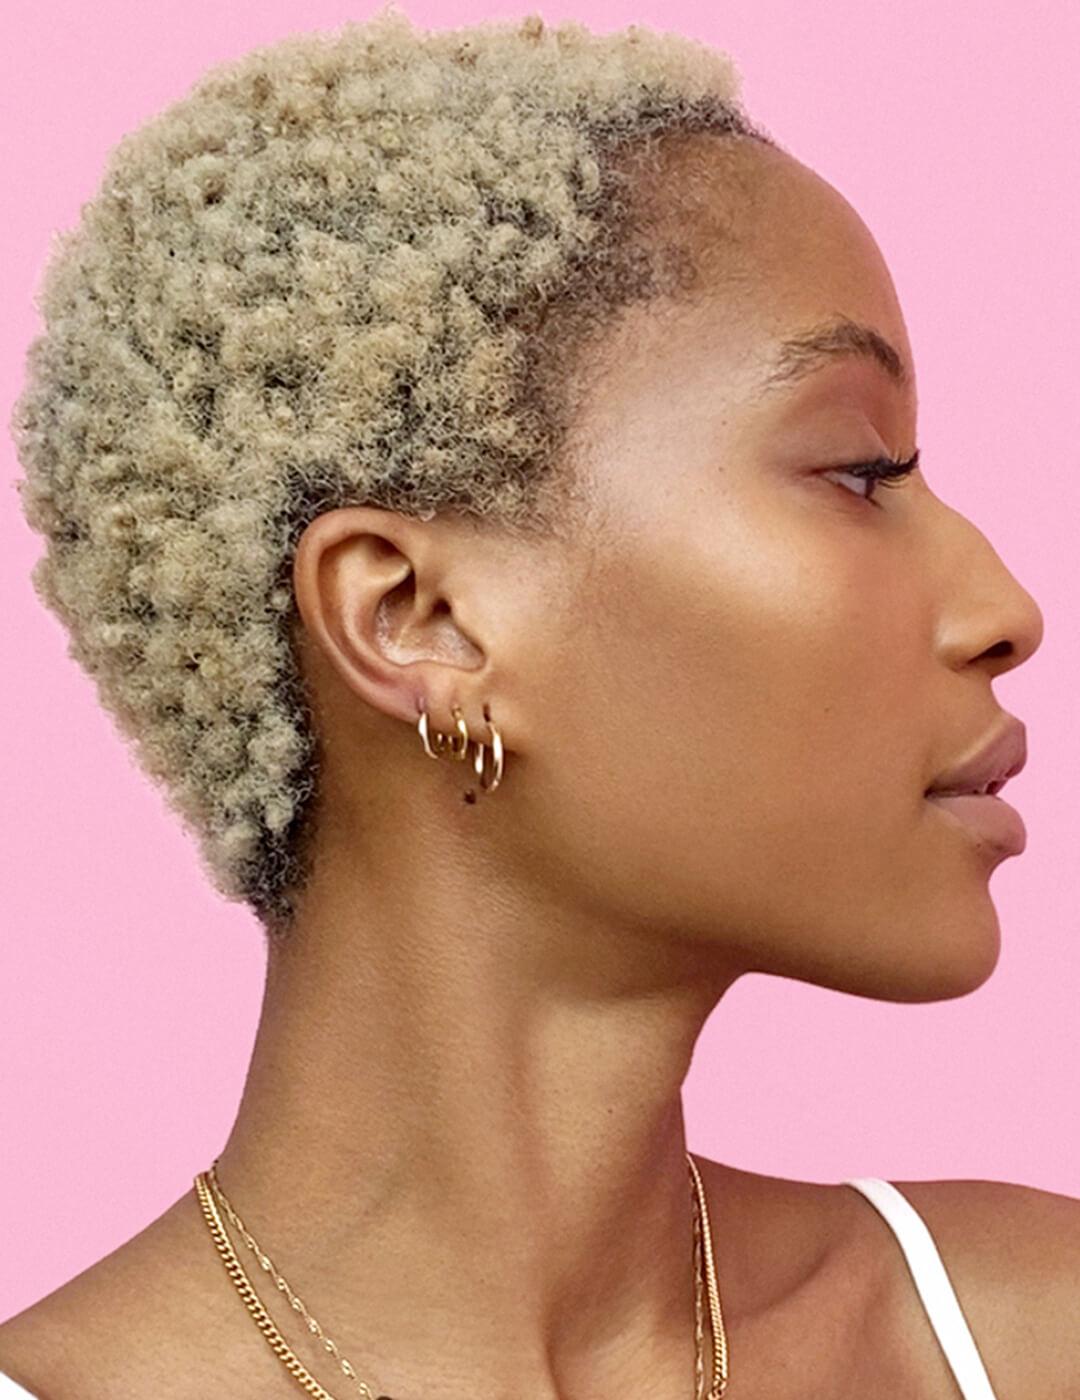 a side view photo of a woman with blonde curly hair with three earings on a pink background